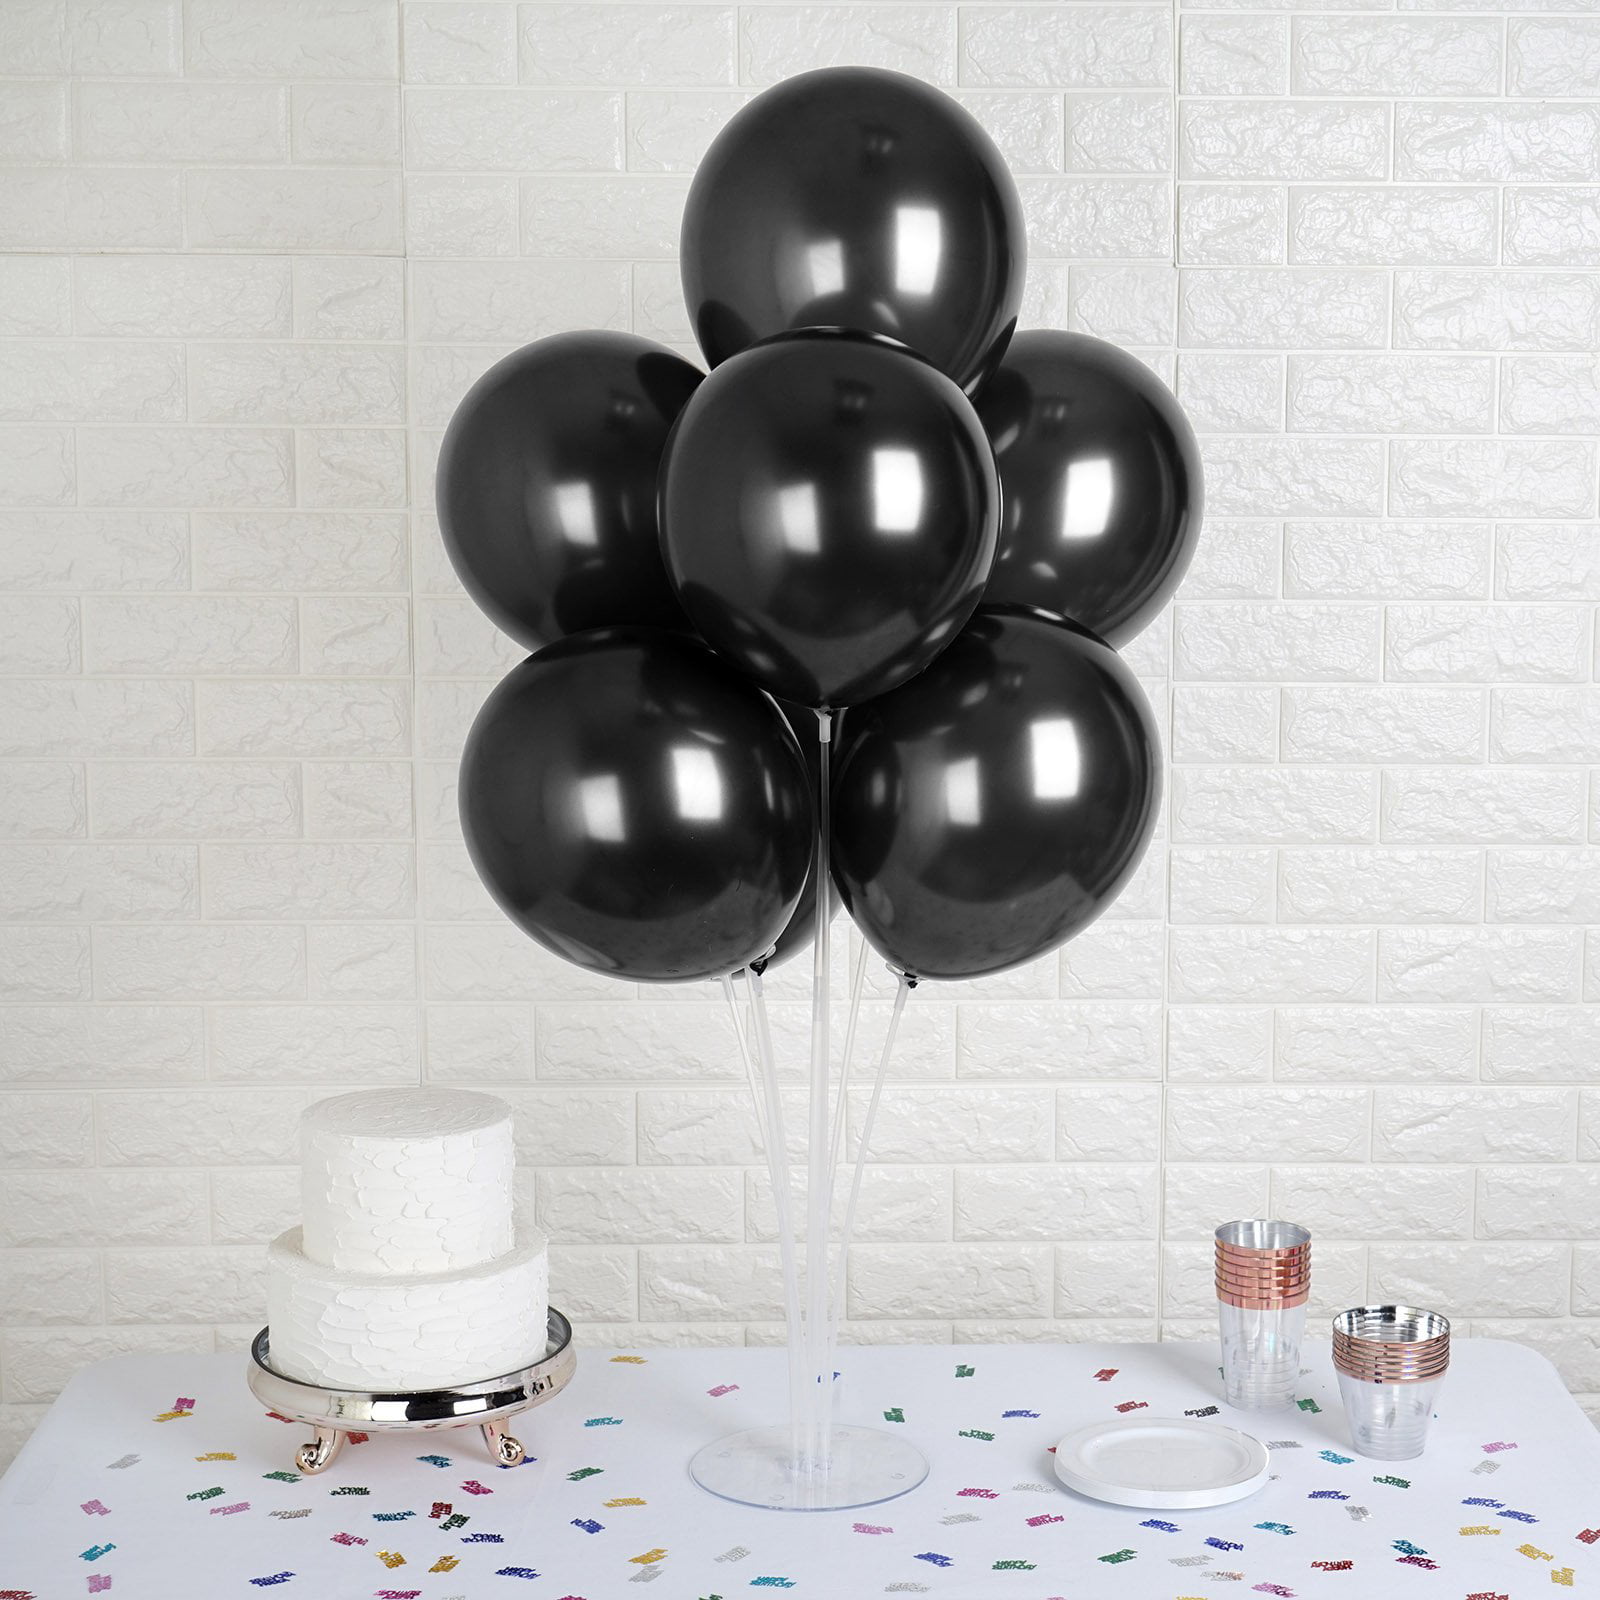 100 WHOLESALE Latex PLAIN BALONS BALLONS helium BALLOONS Quality Party BIRTHDAY, 